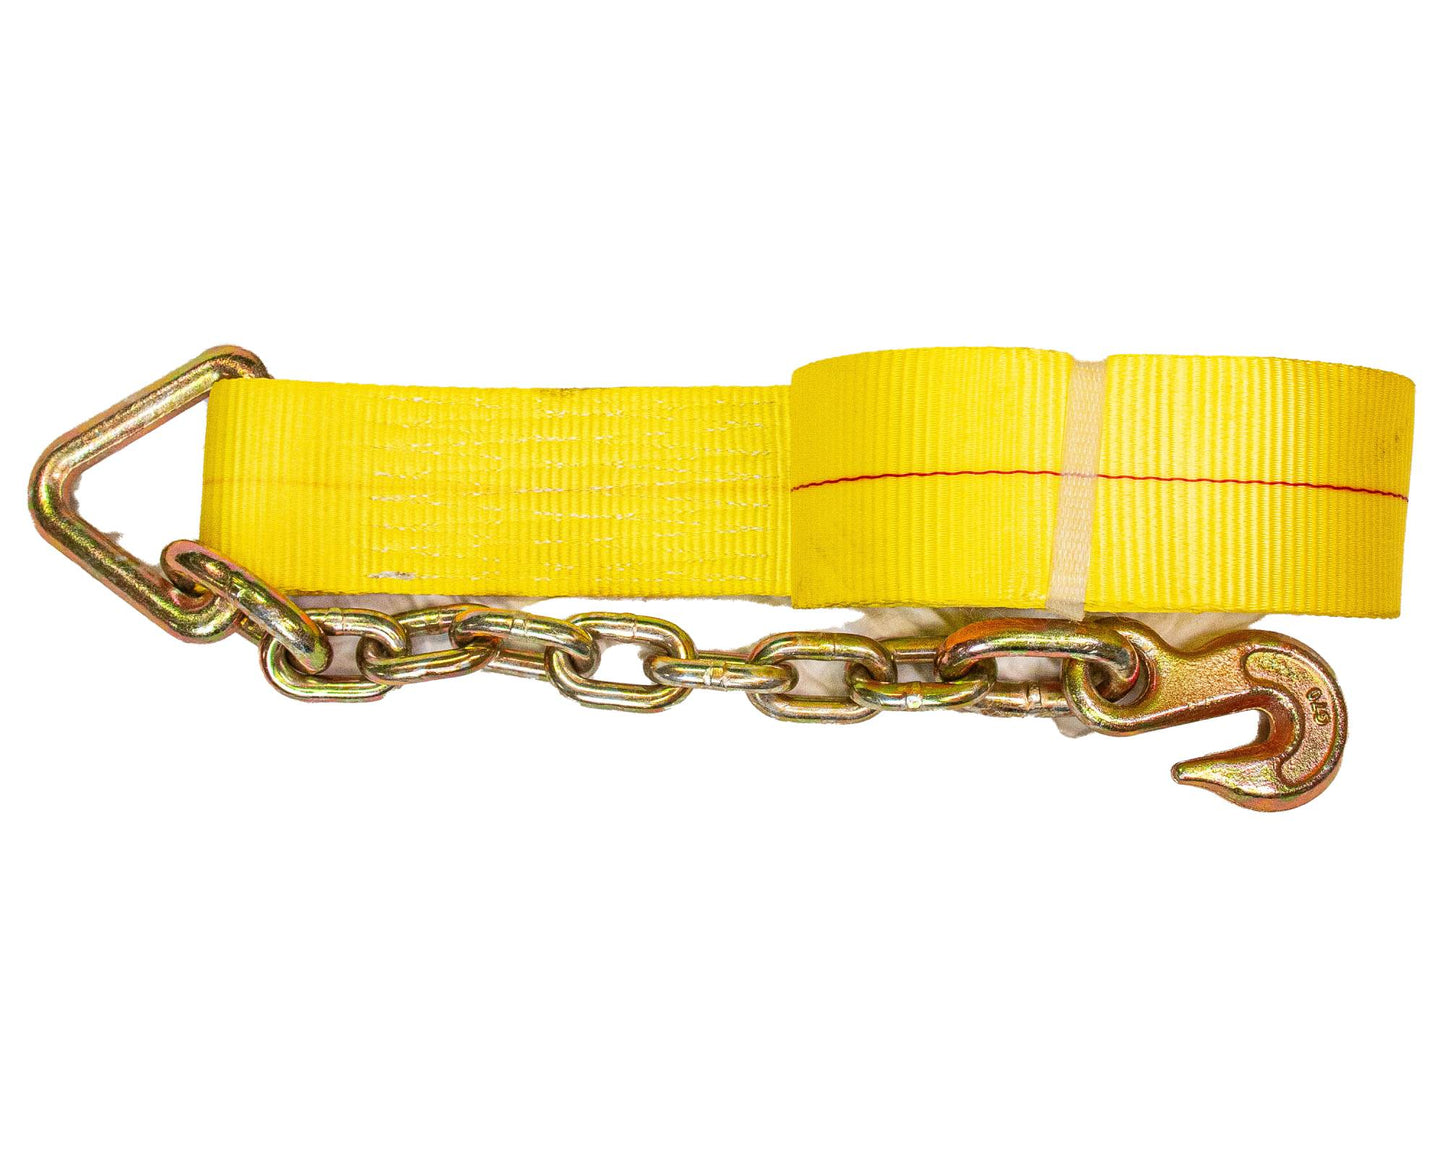 3" Winch Strap With Chain Anchor